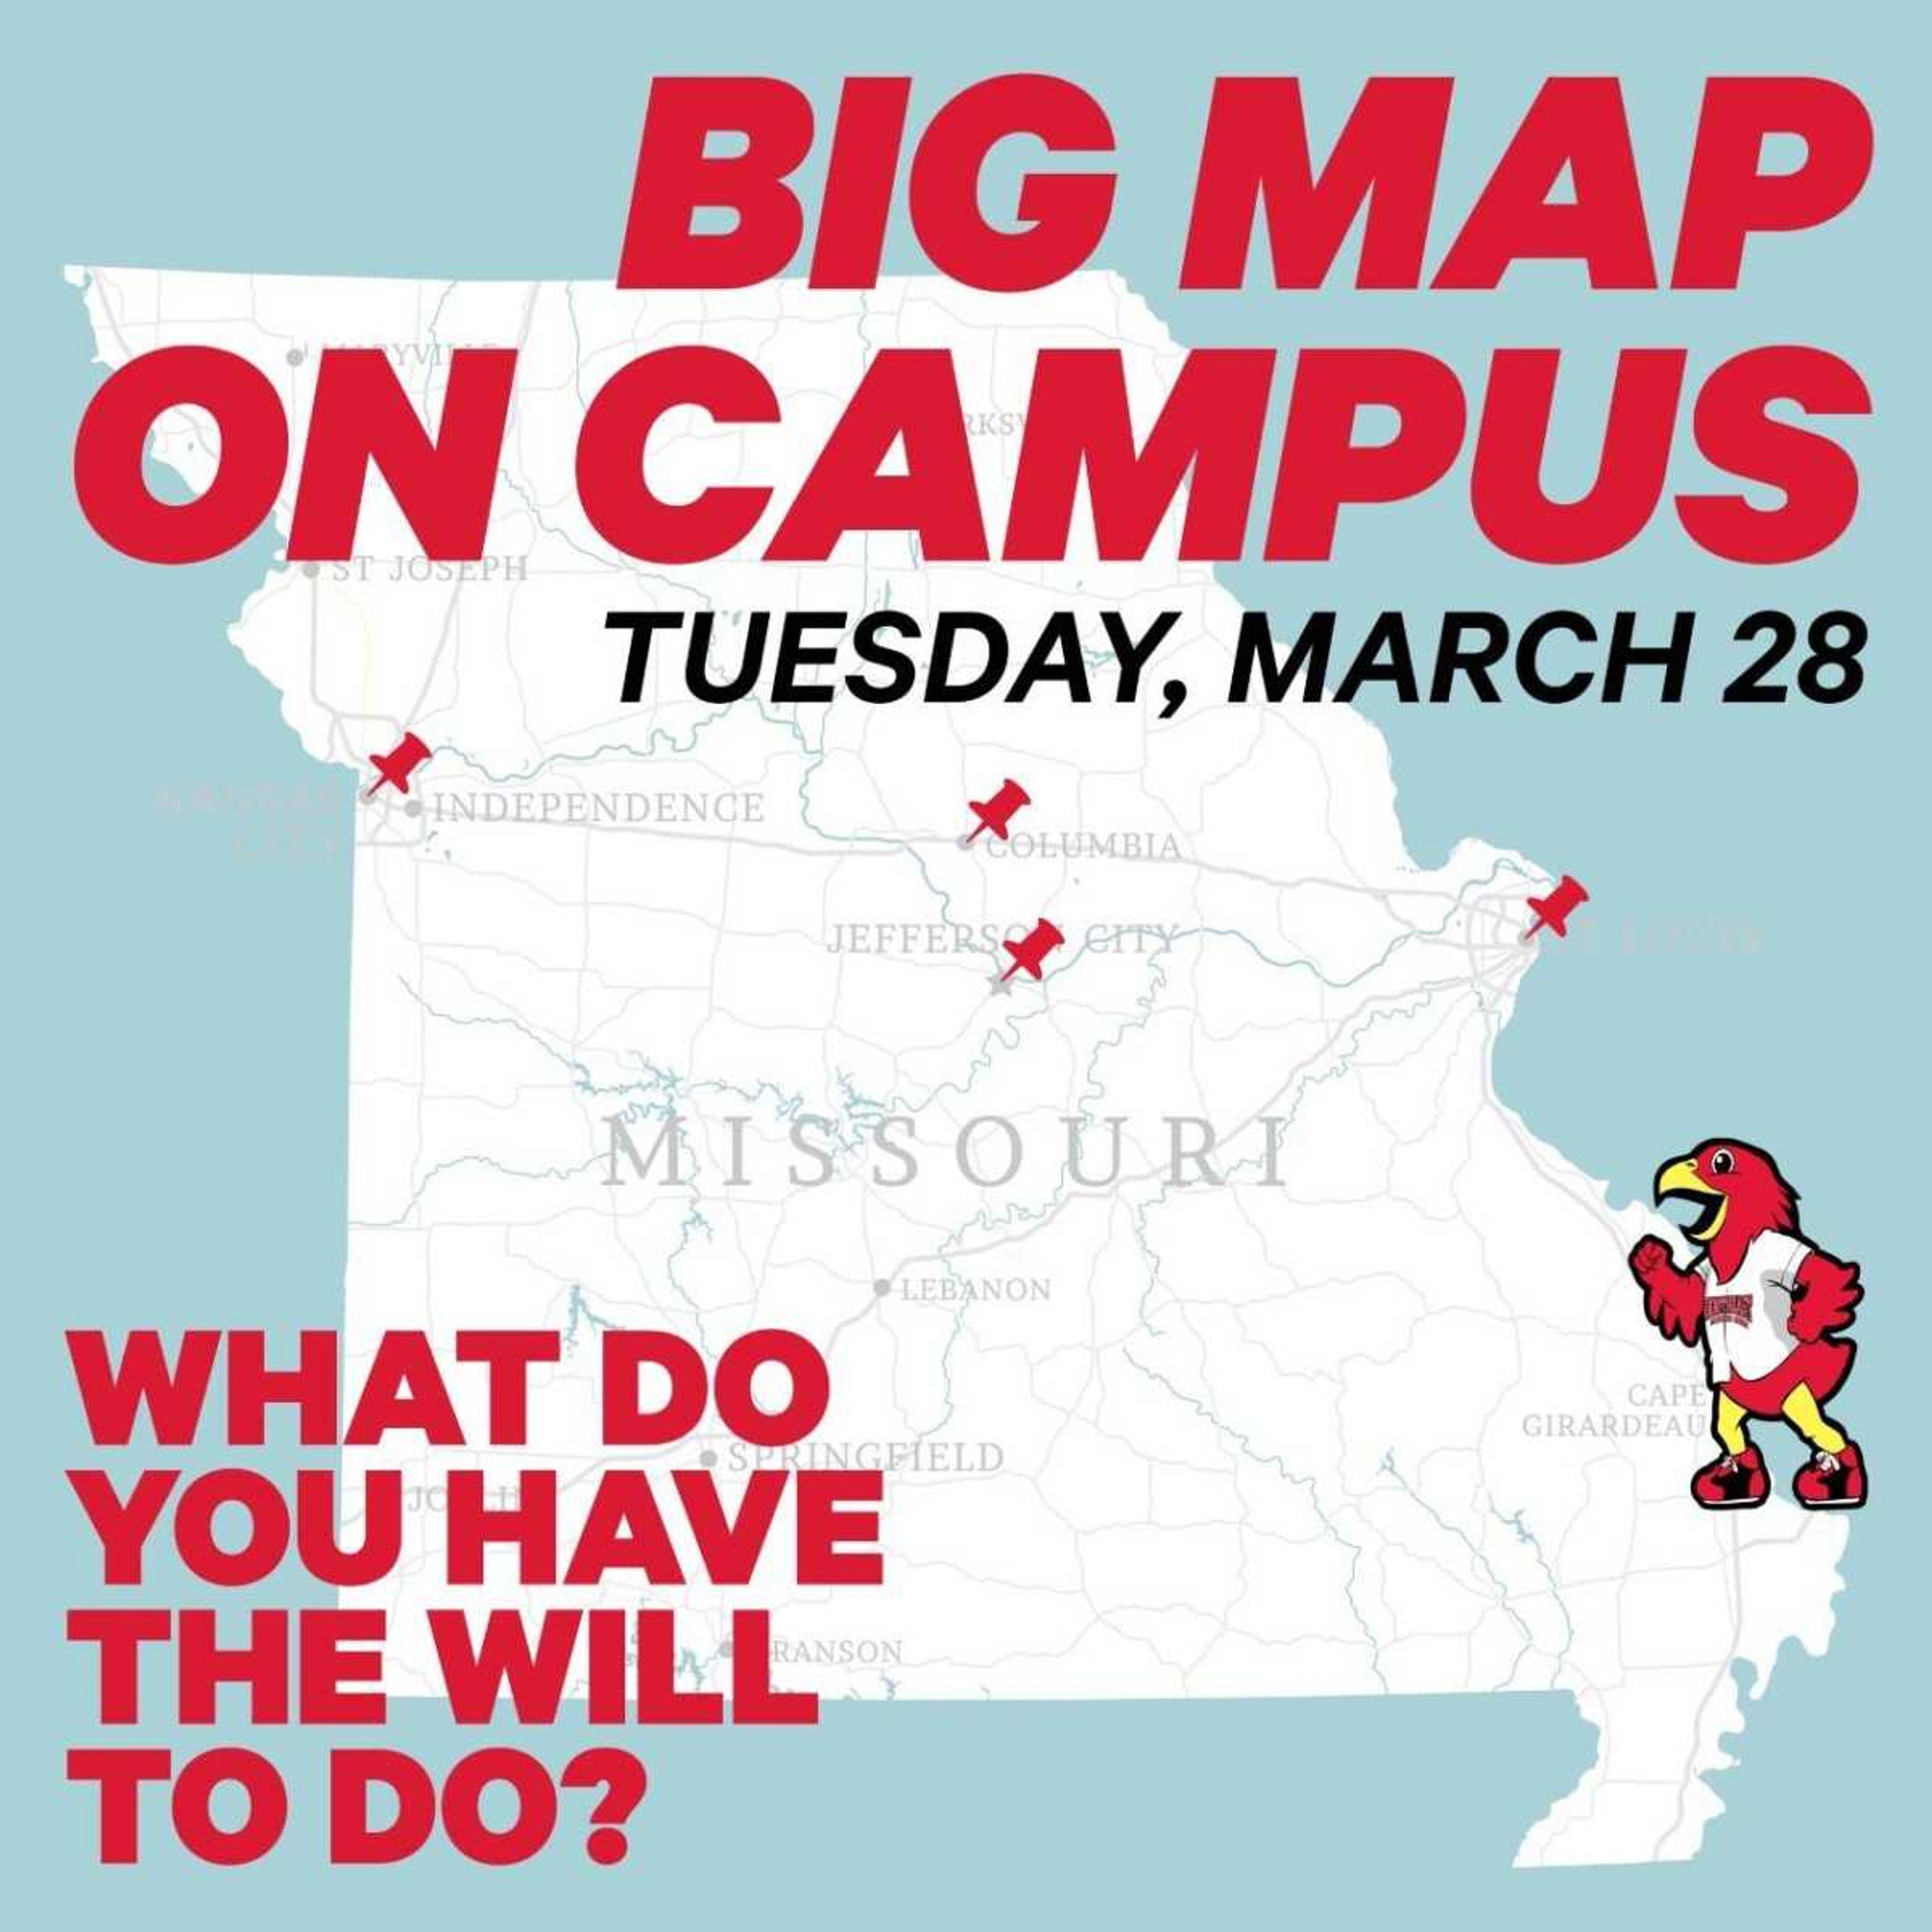 Career Services to host "Big Map" to help students see after-graduation options